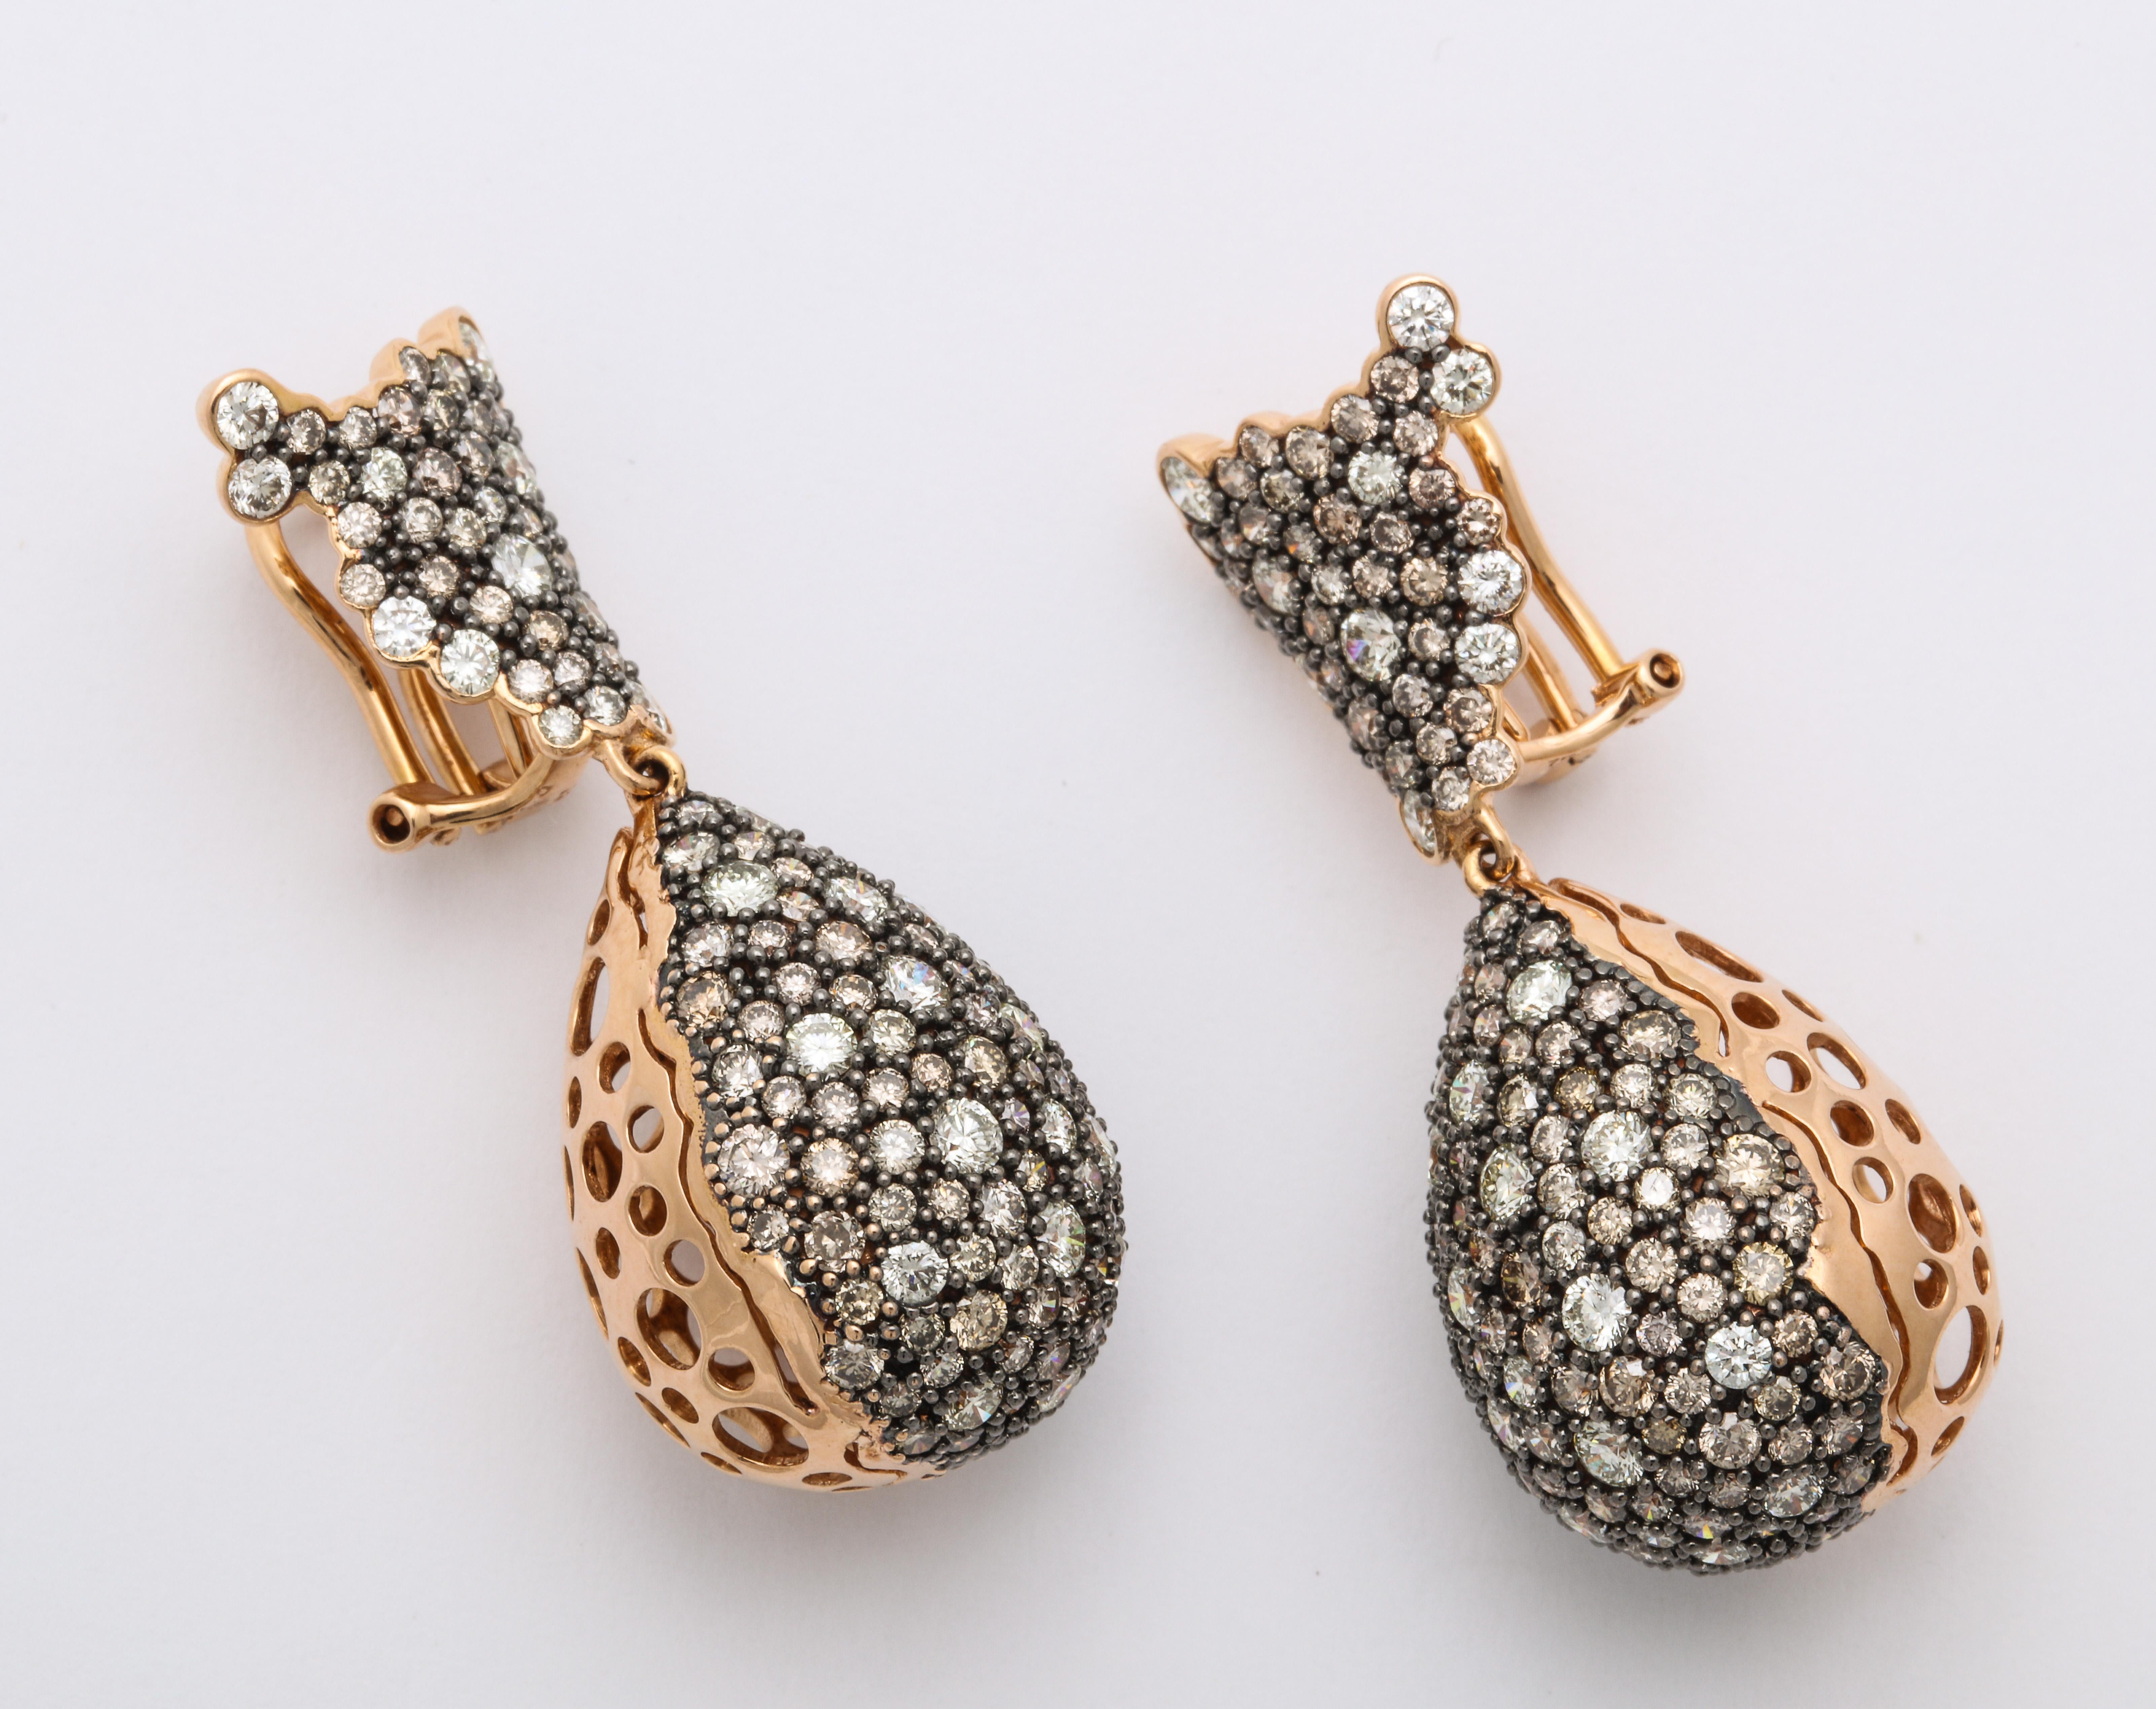 Bohemian chic 18K rose gold stylized ear pendants configured with a scalloped cone-shaped ear component suspending a voluminous pear-shape drop (with a filigree finish on the flip side), decorated entirely with pave'-set, round brillinat-cut natural